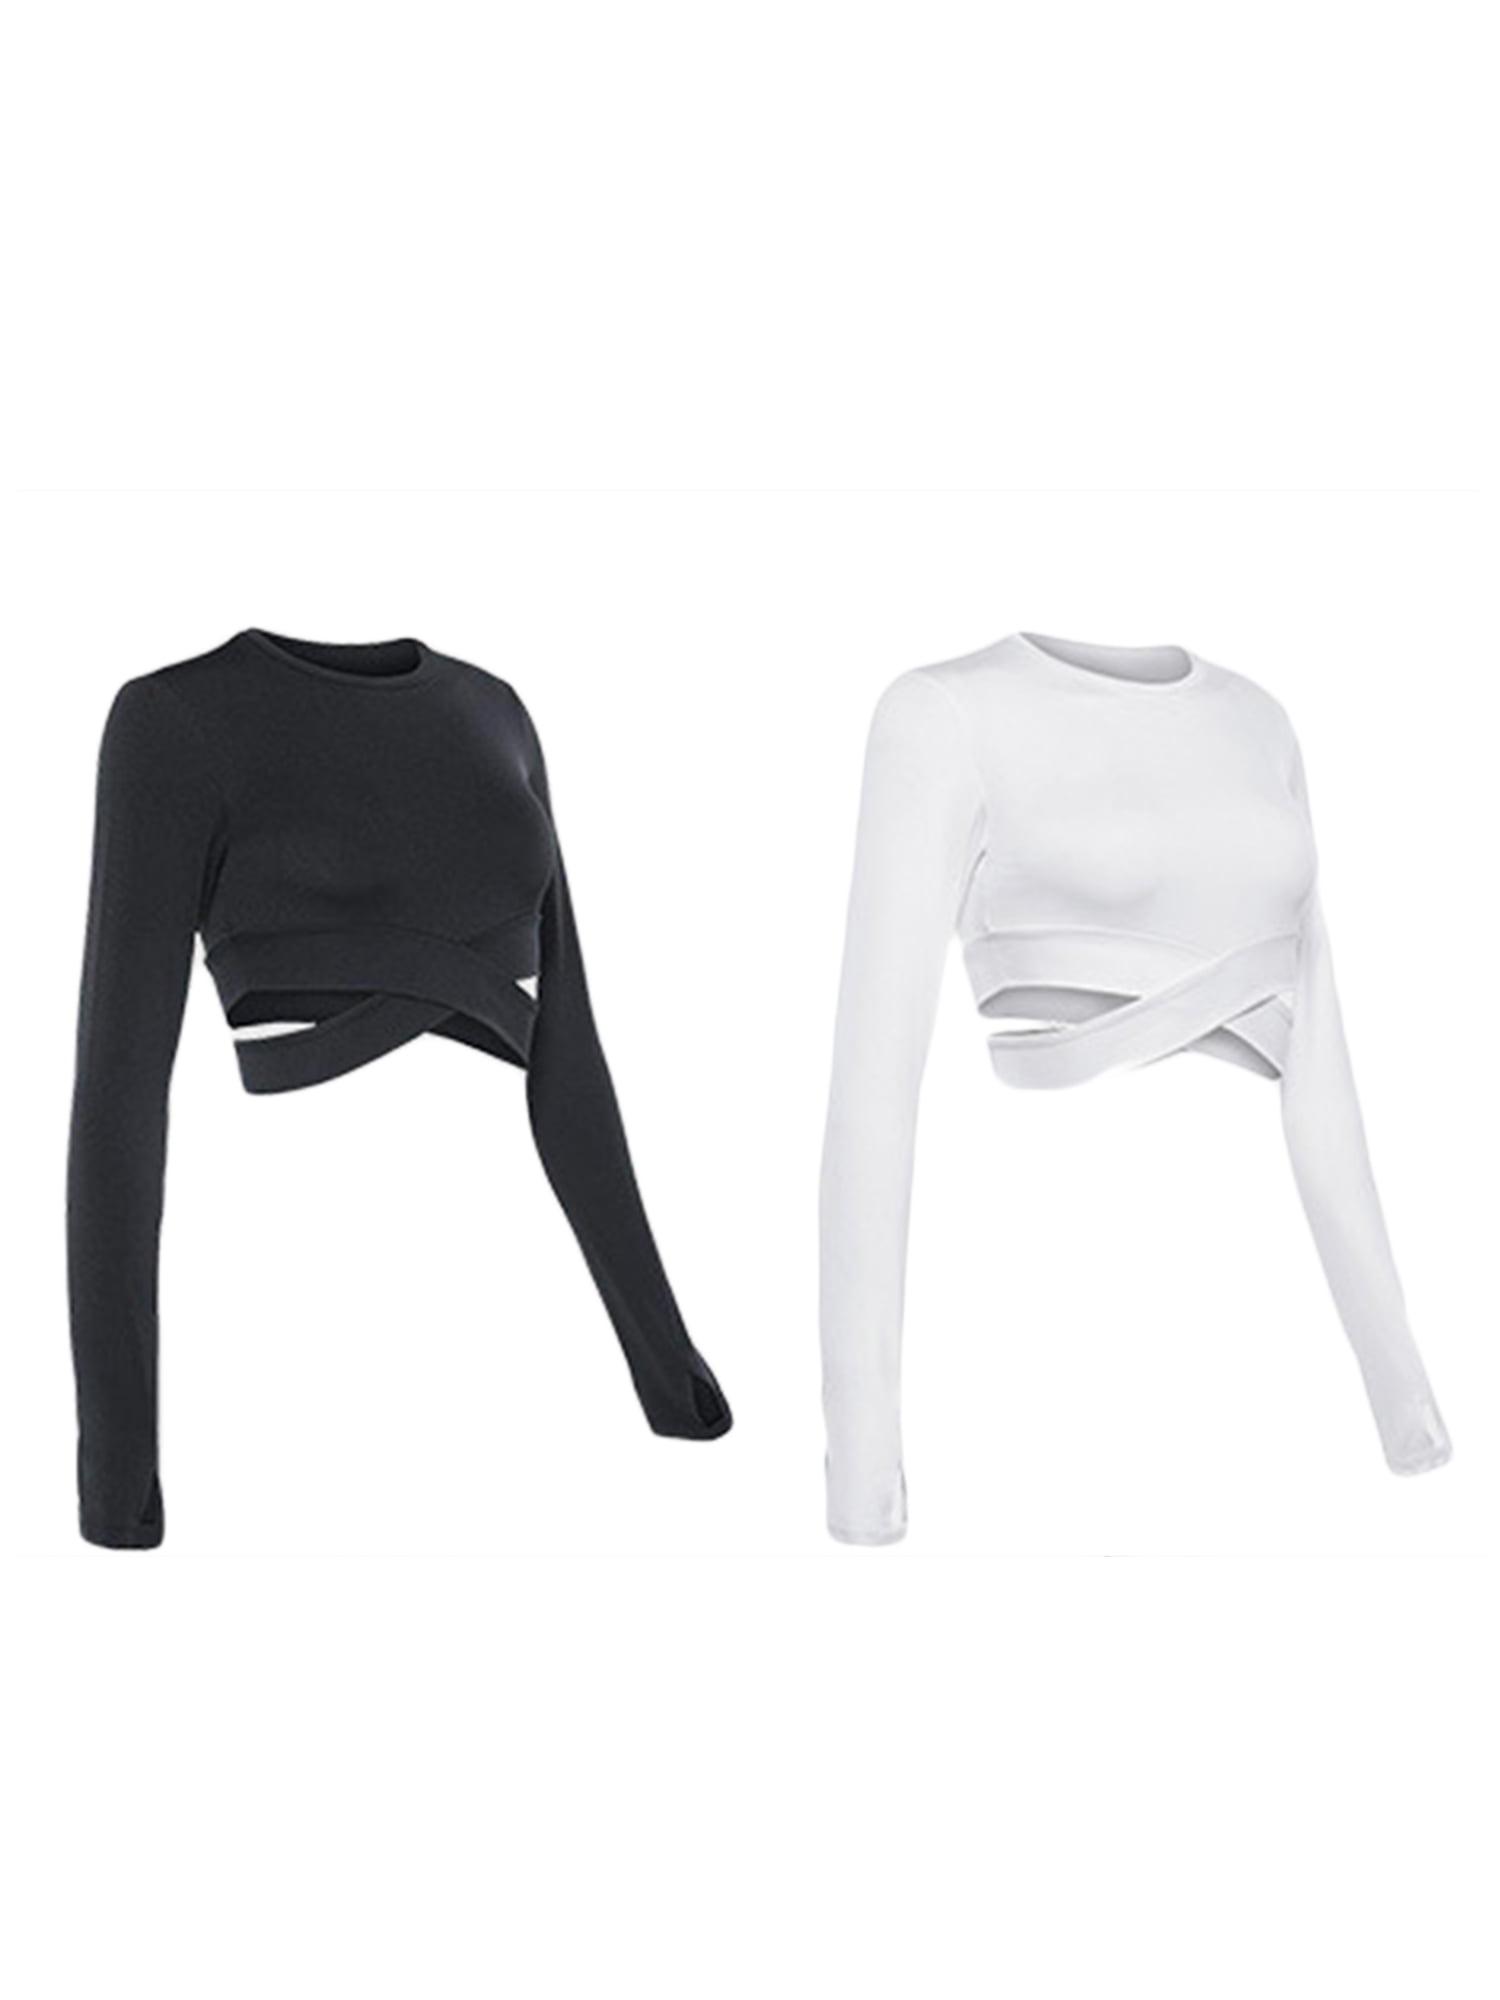 Sexy Dance Workout Shirts Crop Top for Women 2-pack Workout Gym Exercise  Clothes for Girls Yoga Shirts with Thumb Holes Sexy Shirts Sportswear